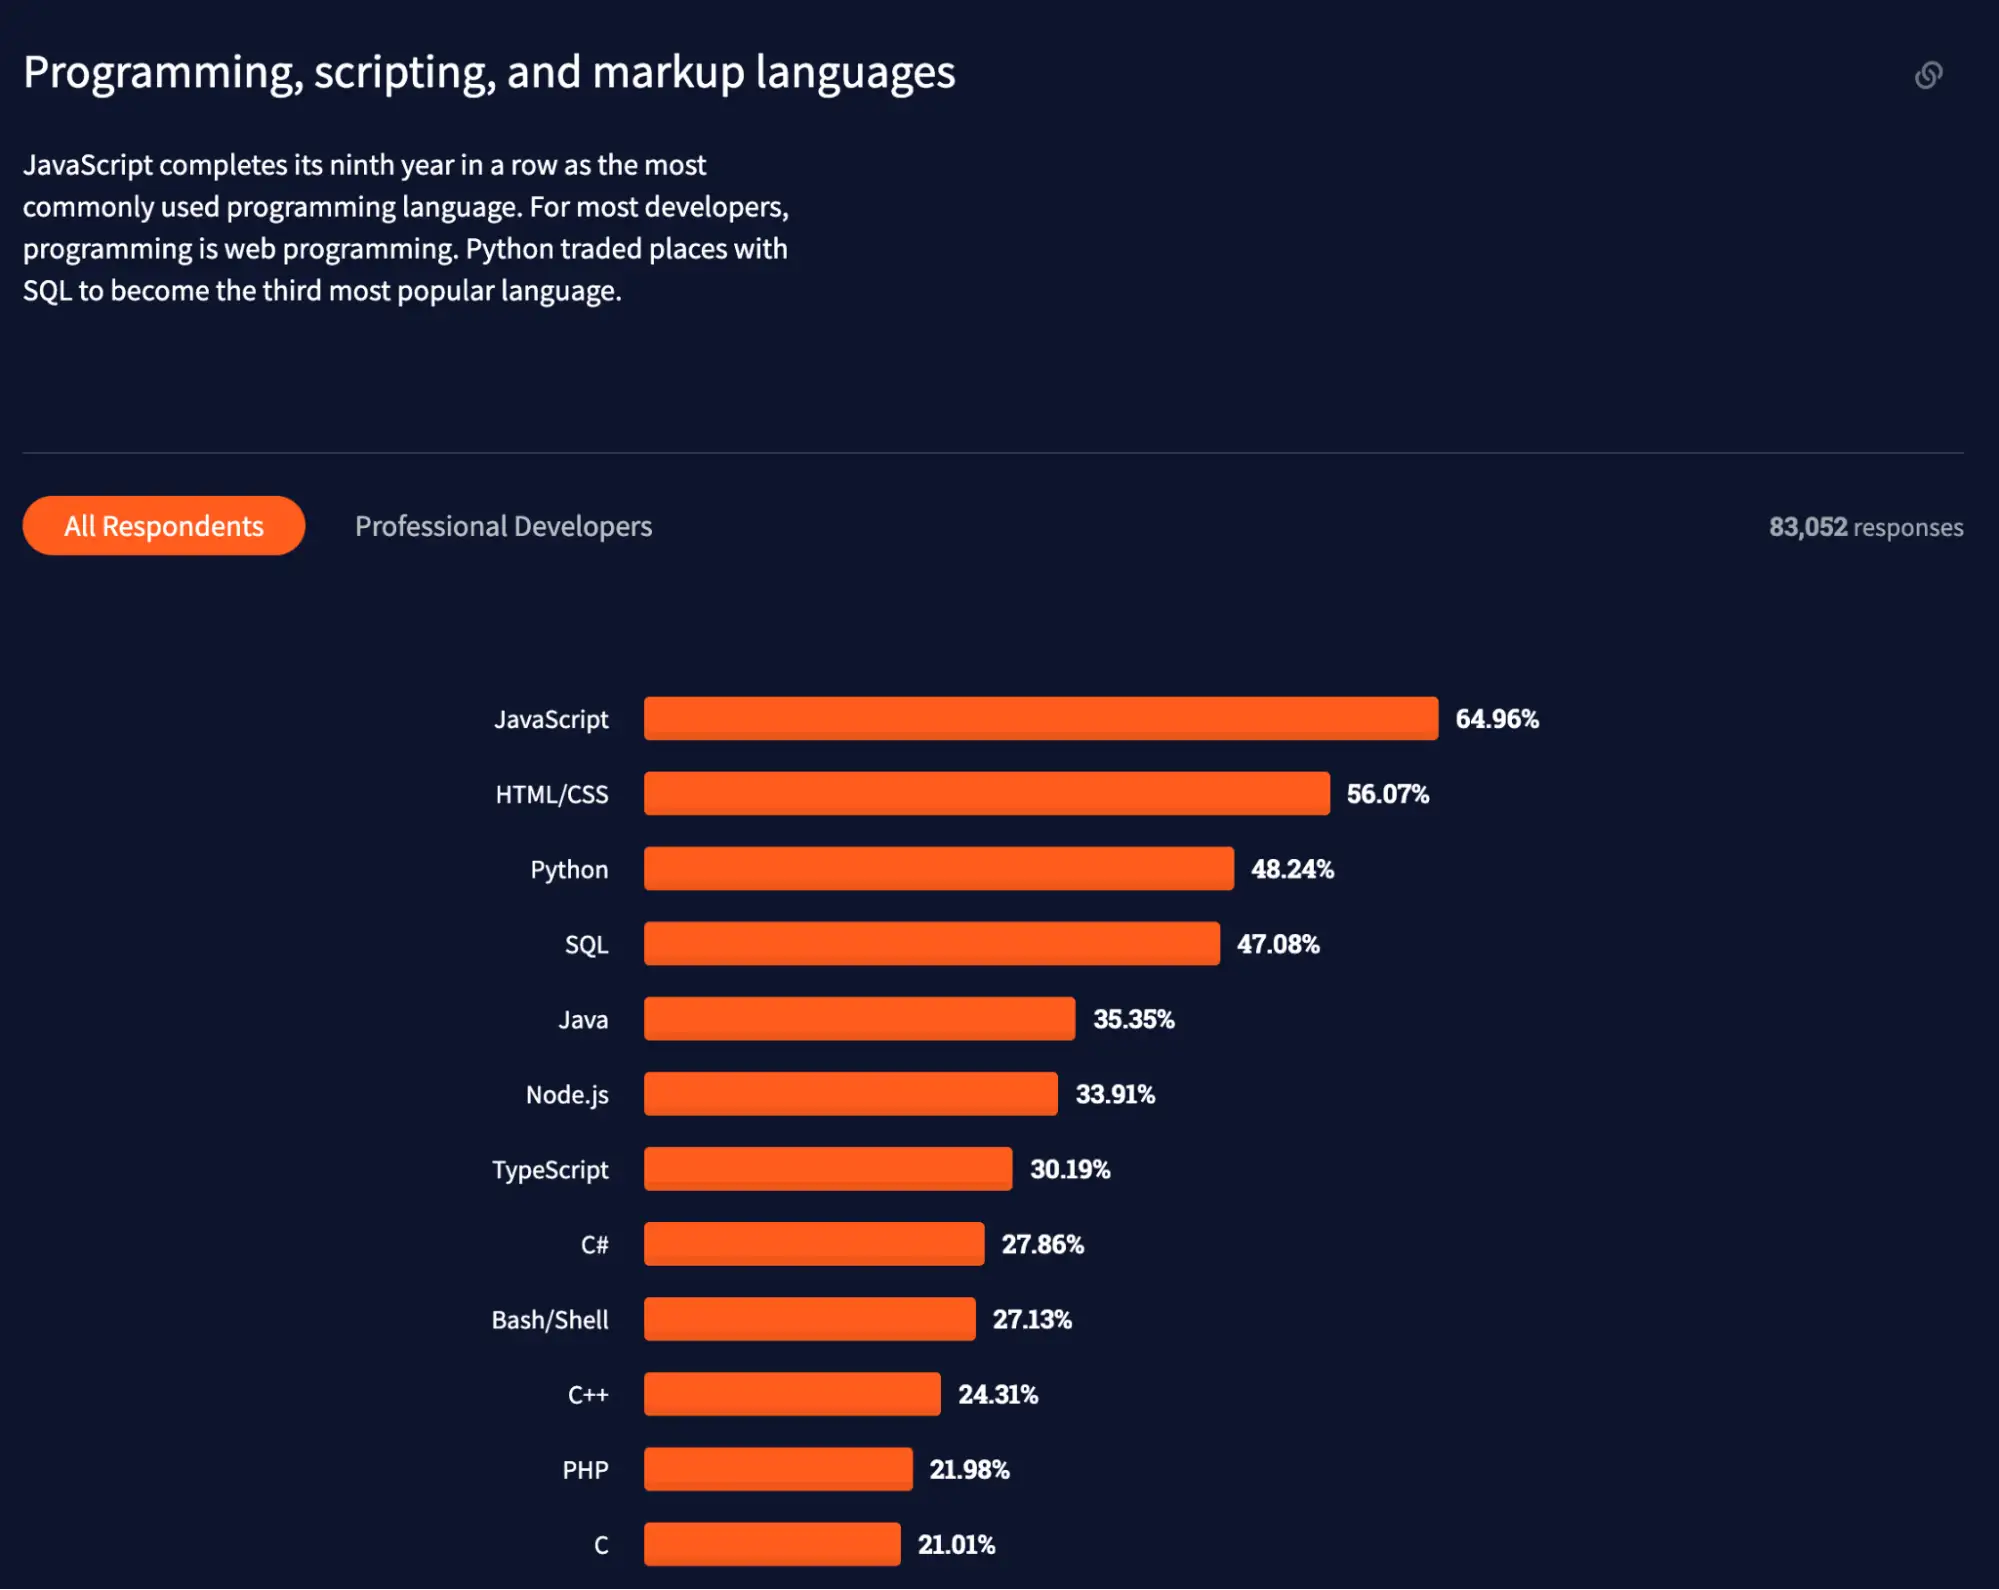 Most used programming language - there can only be one king and it is JavaScript